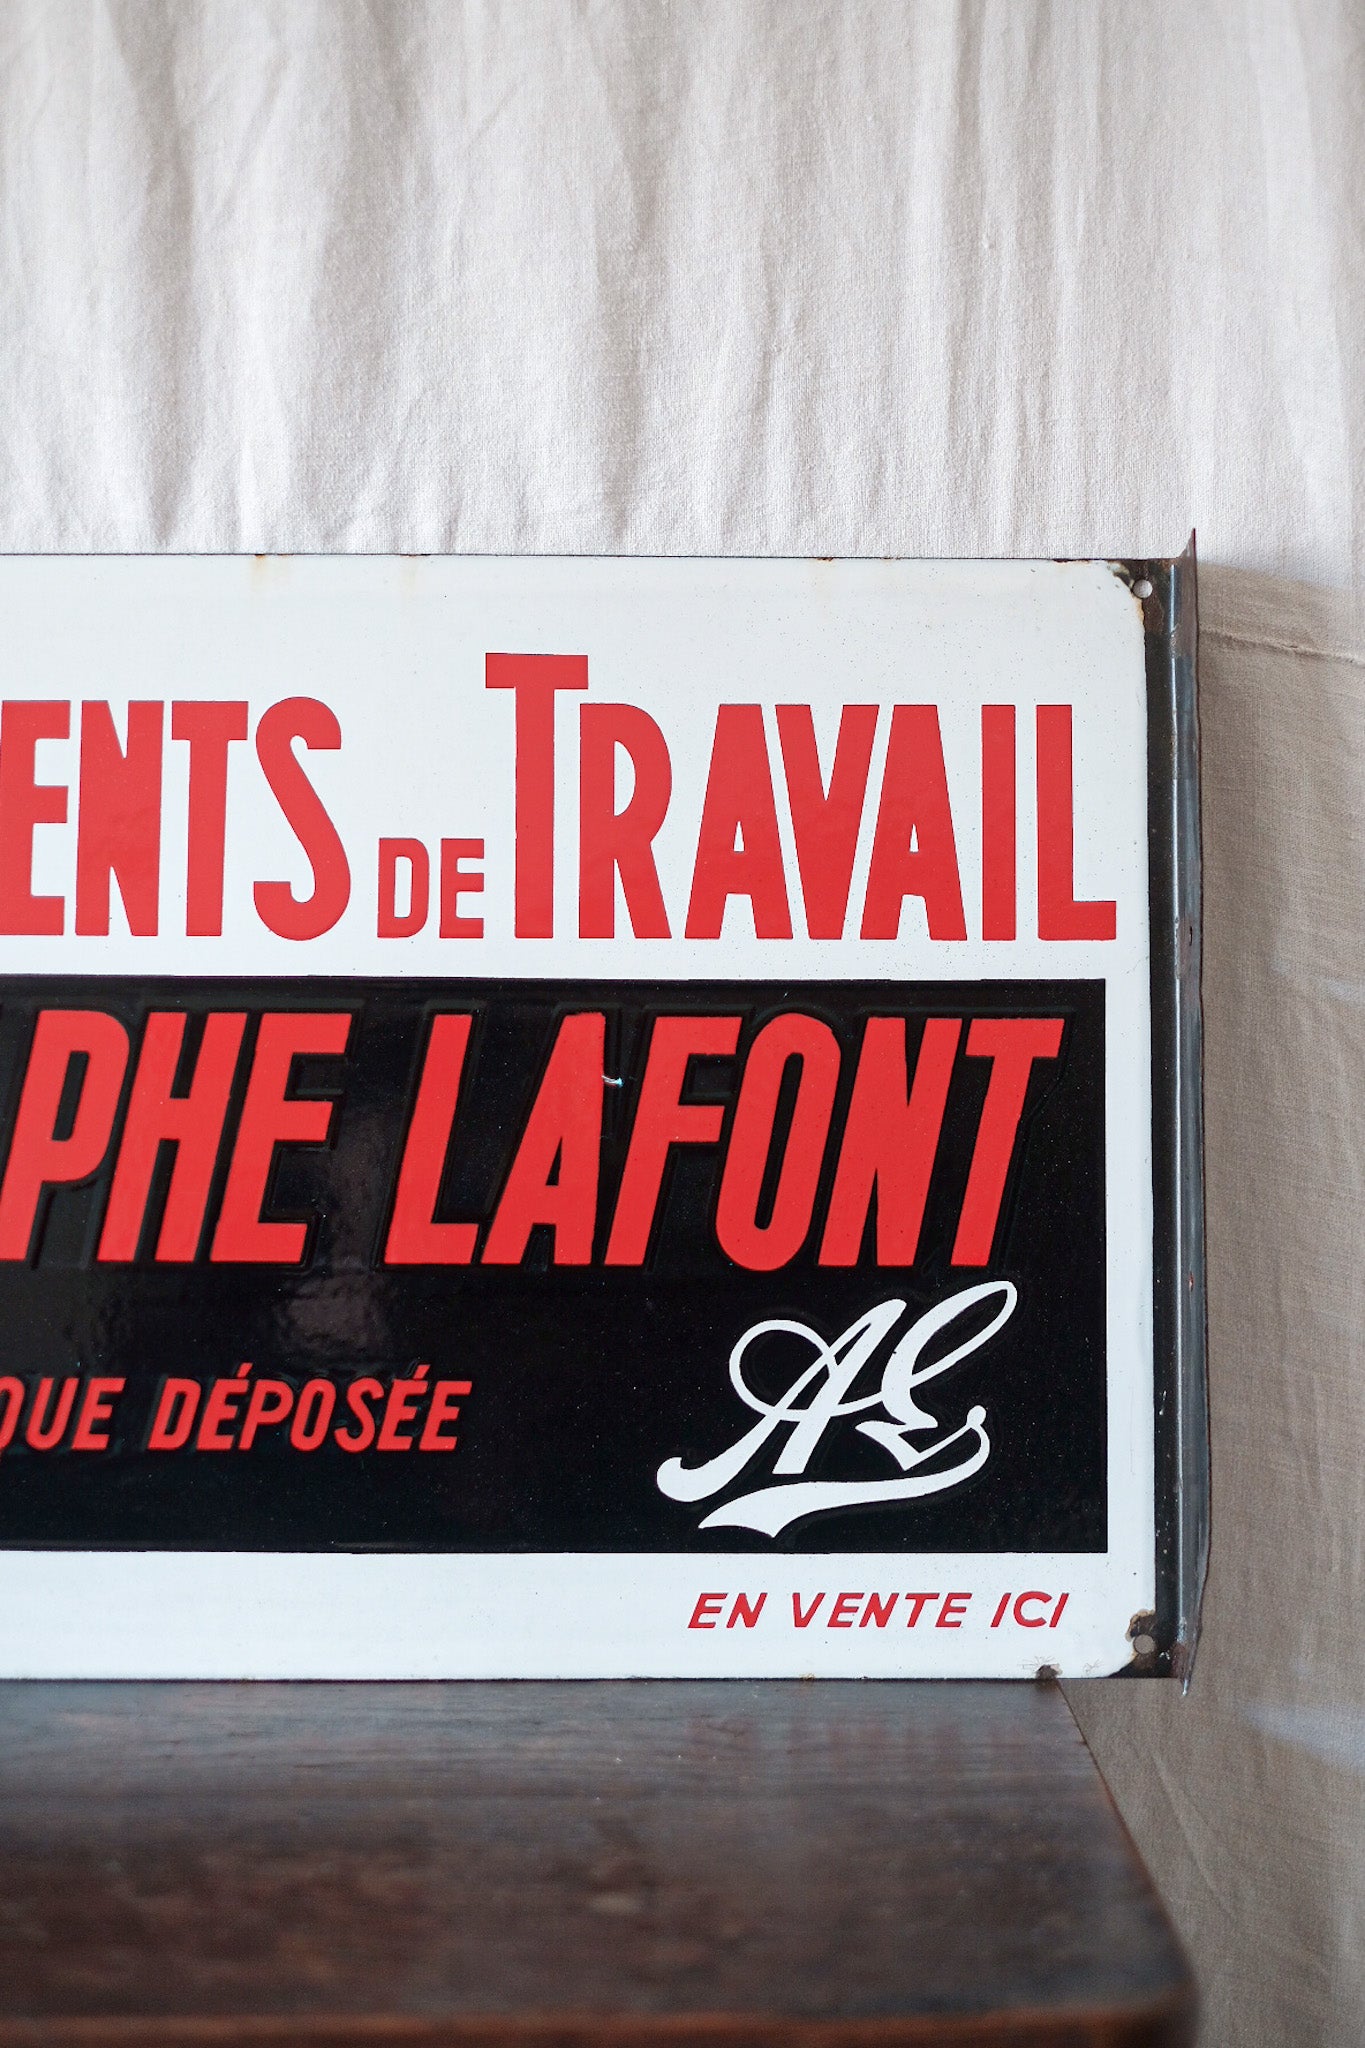 [~ 50's] French Vintage Enamel Plate "Adolphe Lafont"